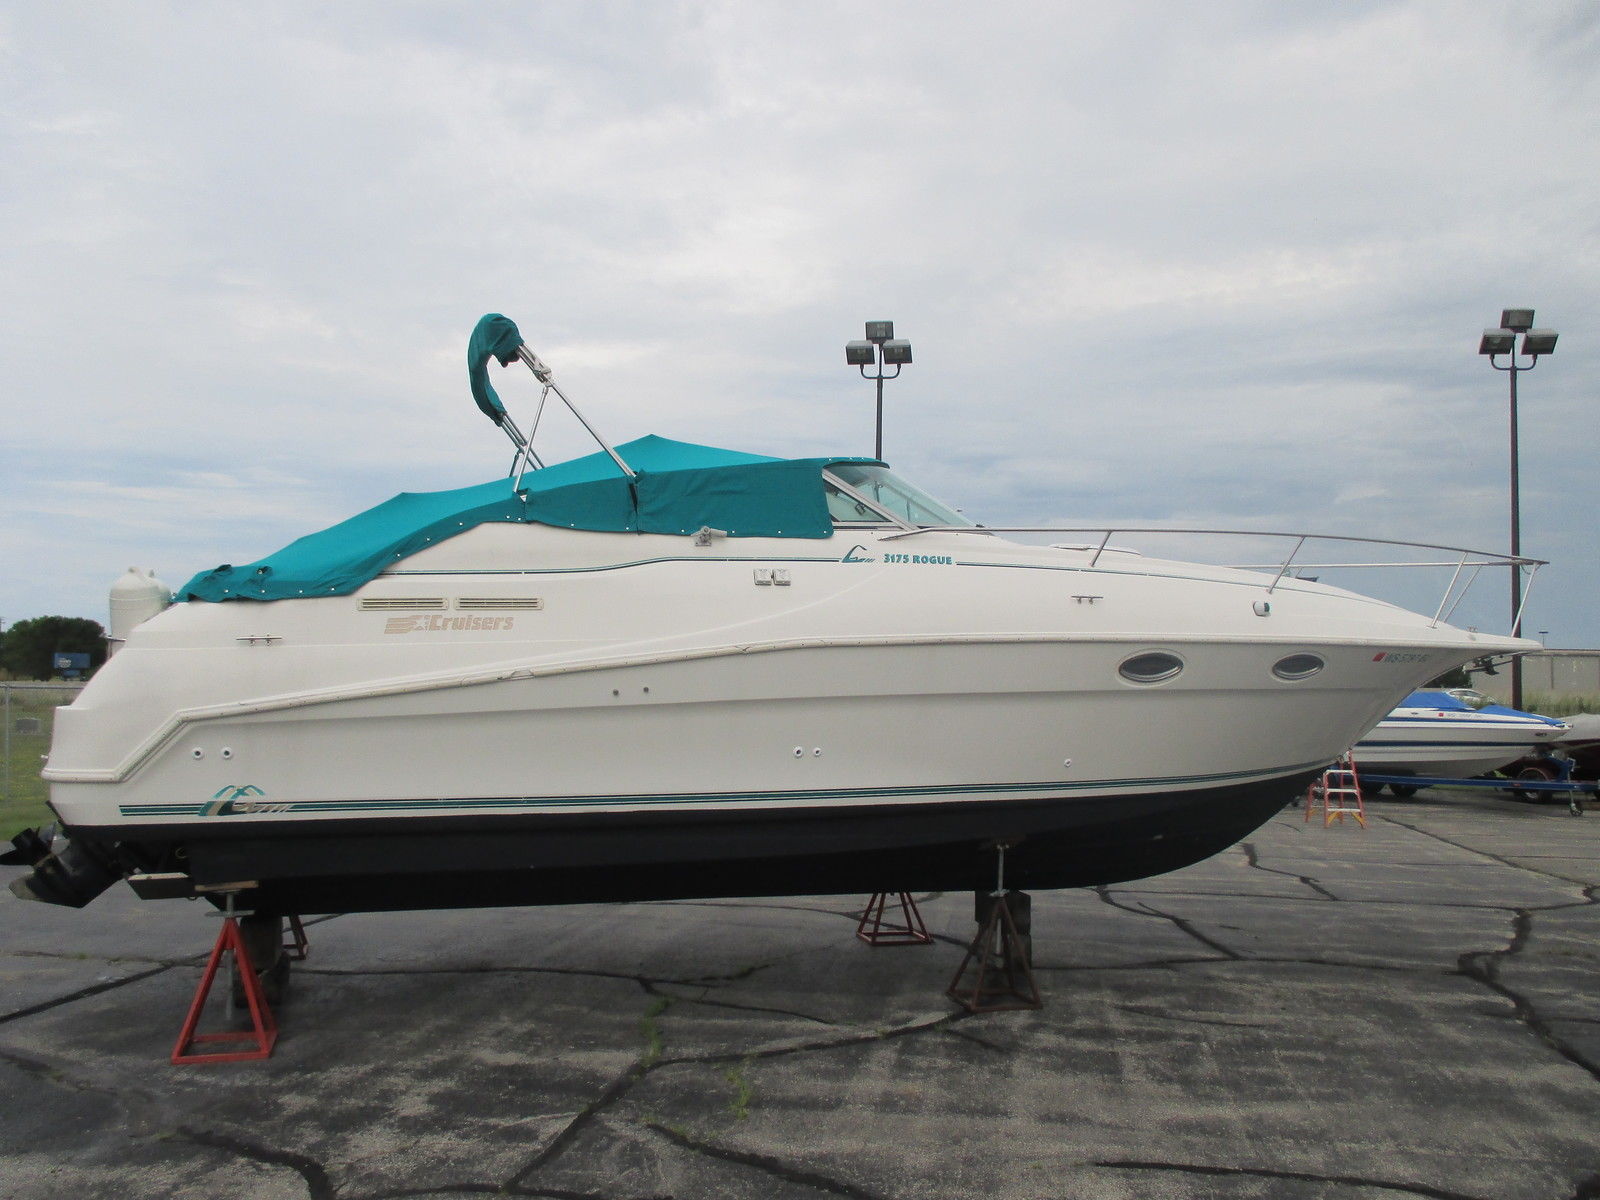 Cruisers 3175 Rogue 1996 for sale for $18,500 - Boats-from-USA.com